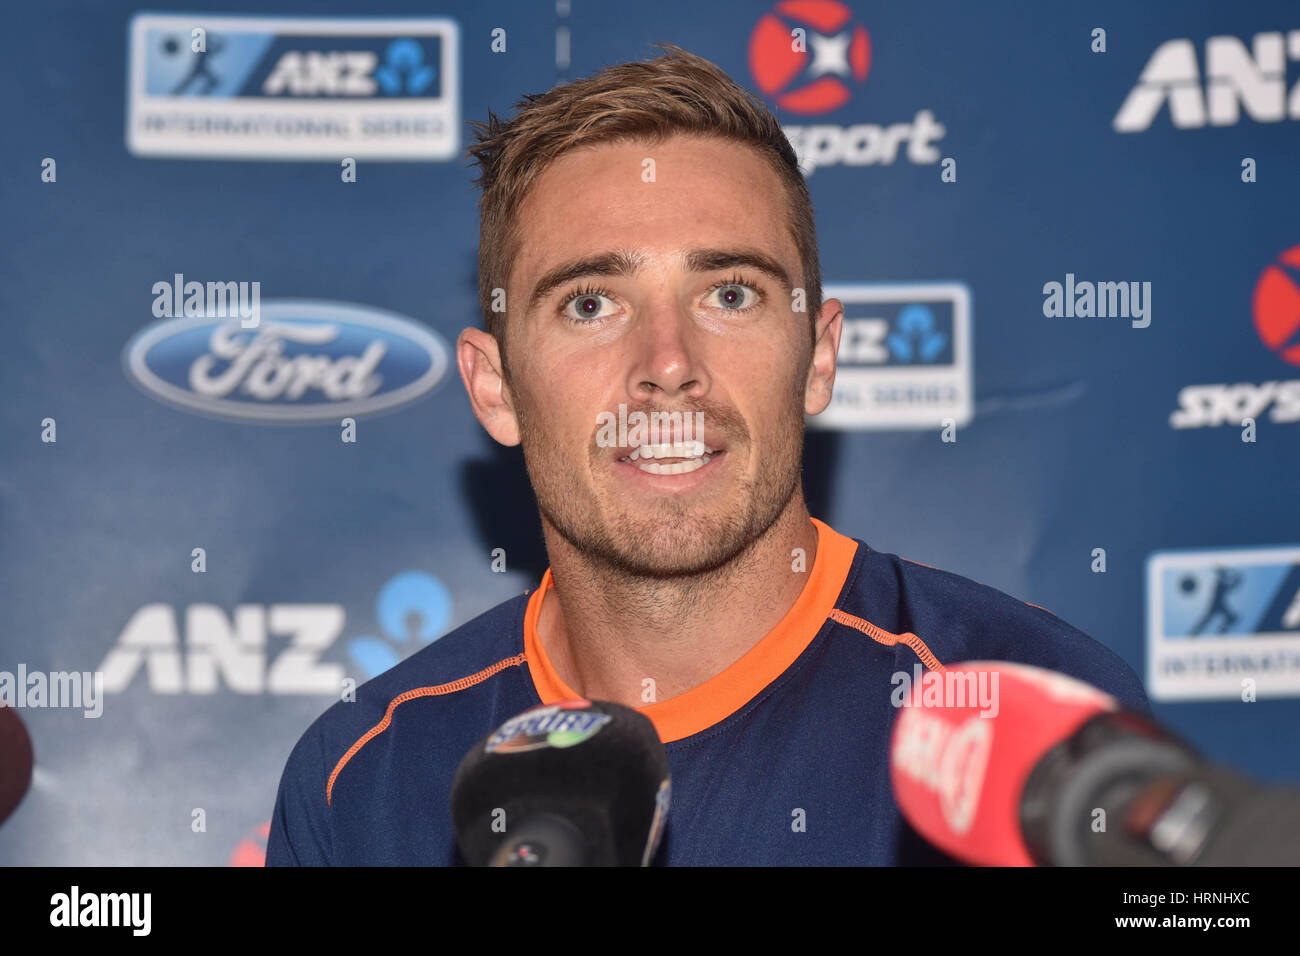 Auckland, New Zealand. 03rd Mar, 2017. New Zealand Blackcaps bowler Tim Southee speaks to the media before the training session ahead of final match of One Day International cricket against South Africa tomorrow. Credit: Shirley Kwok/Pacific Press/Alamy Live News Stock Photo